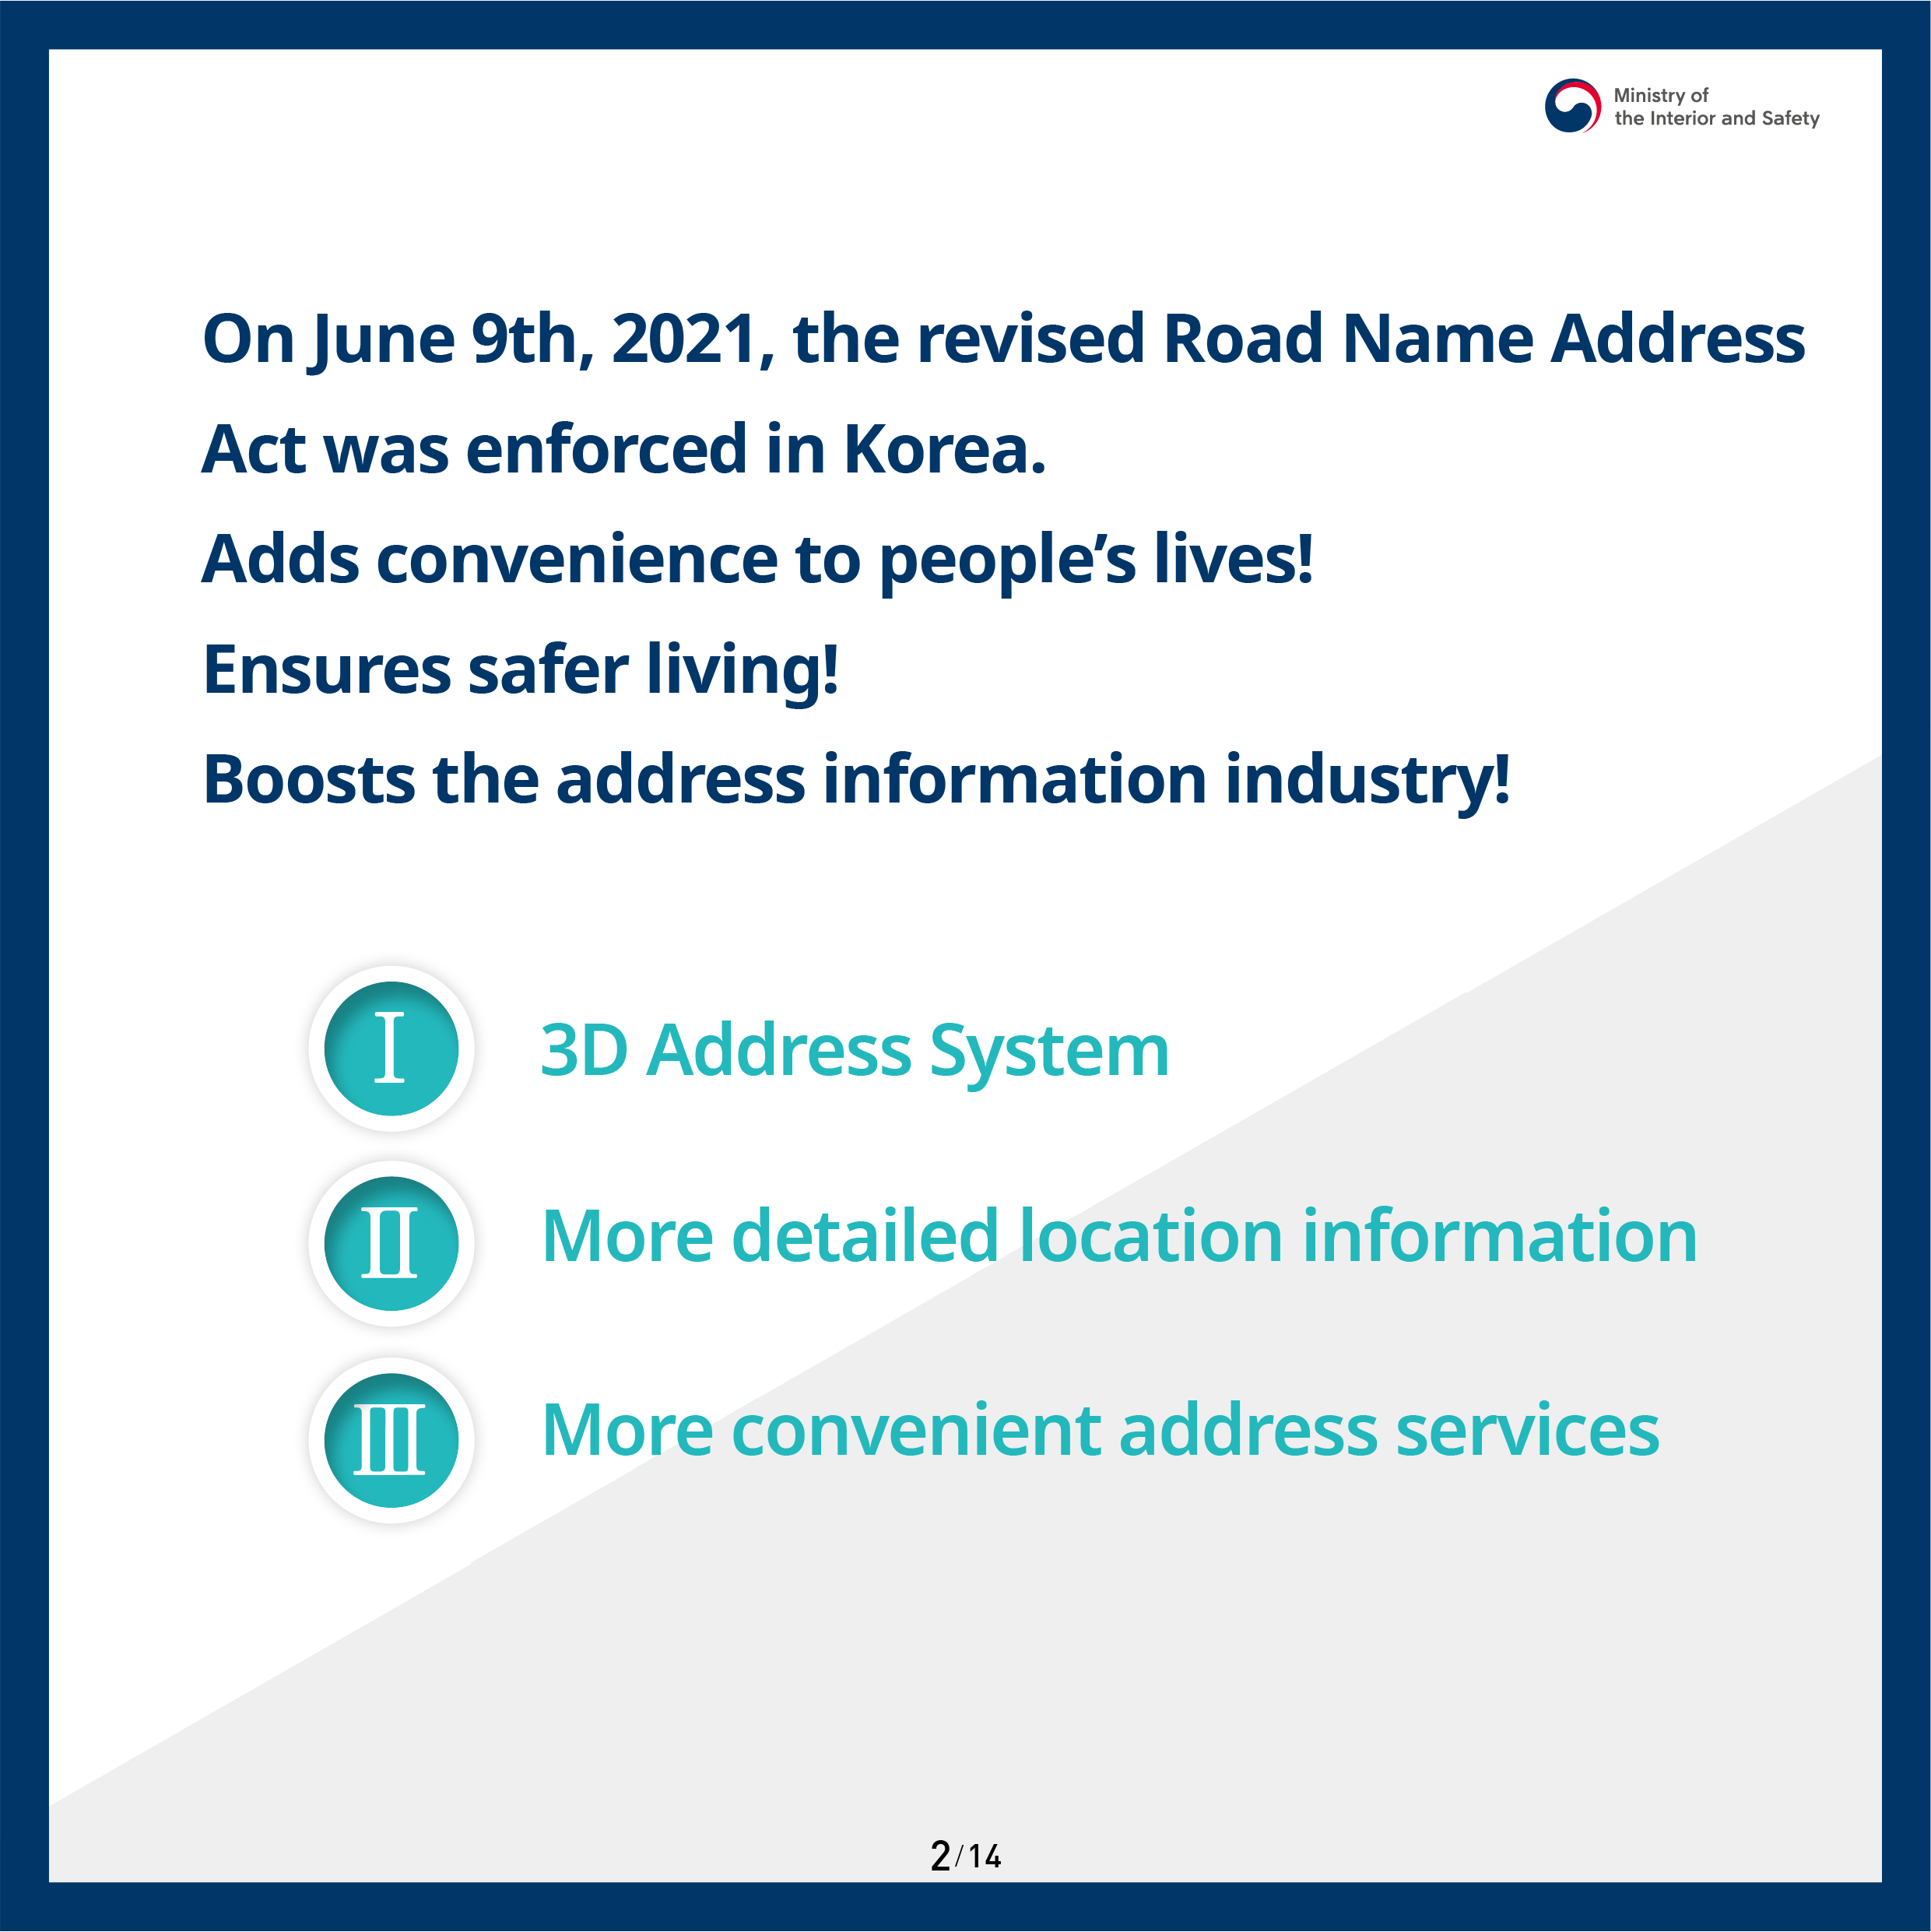 On June 9th, 2021, the revised Road Name Address Act was enforced in Korea. Adds convenience to people's lives! Ensures safer living! Boosts the address information industry! 1. 3D Address System 2. More detailed location information 3. More convenient address services